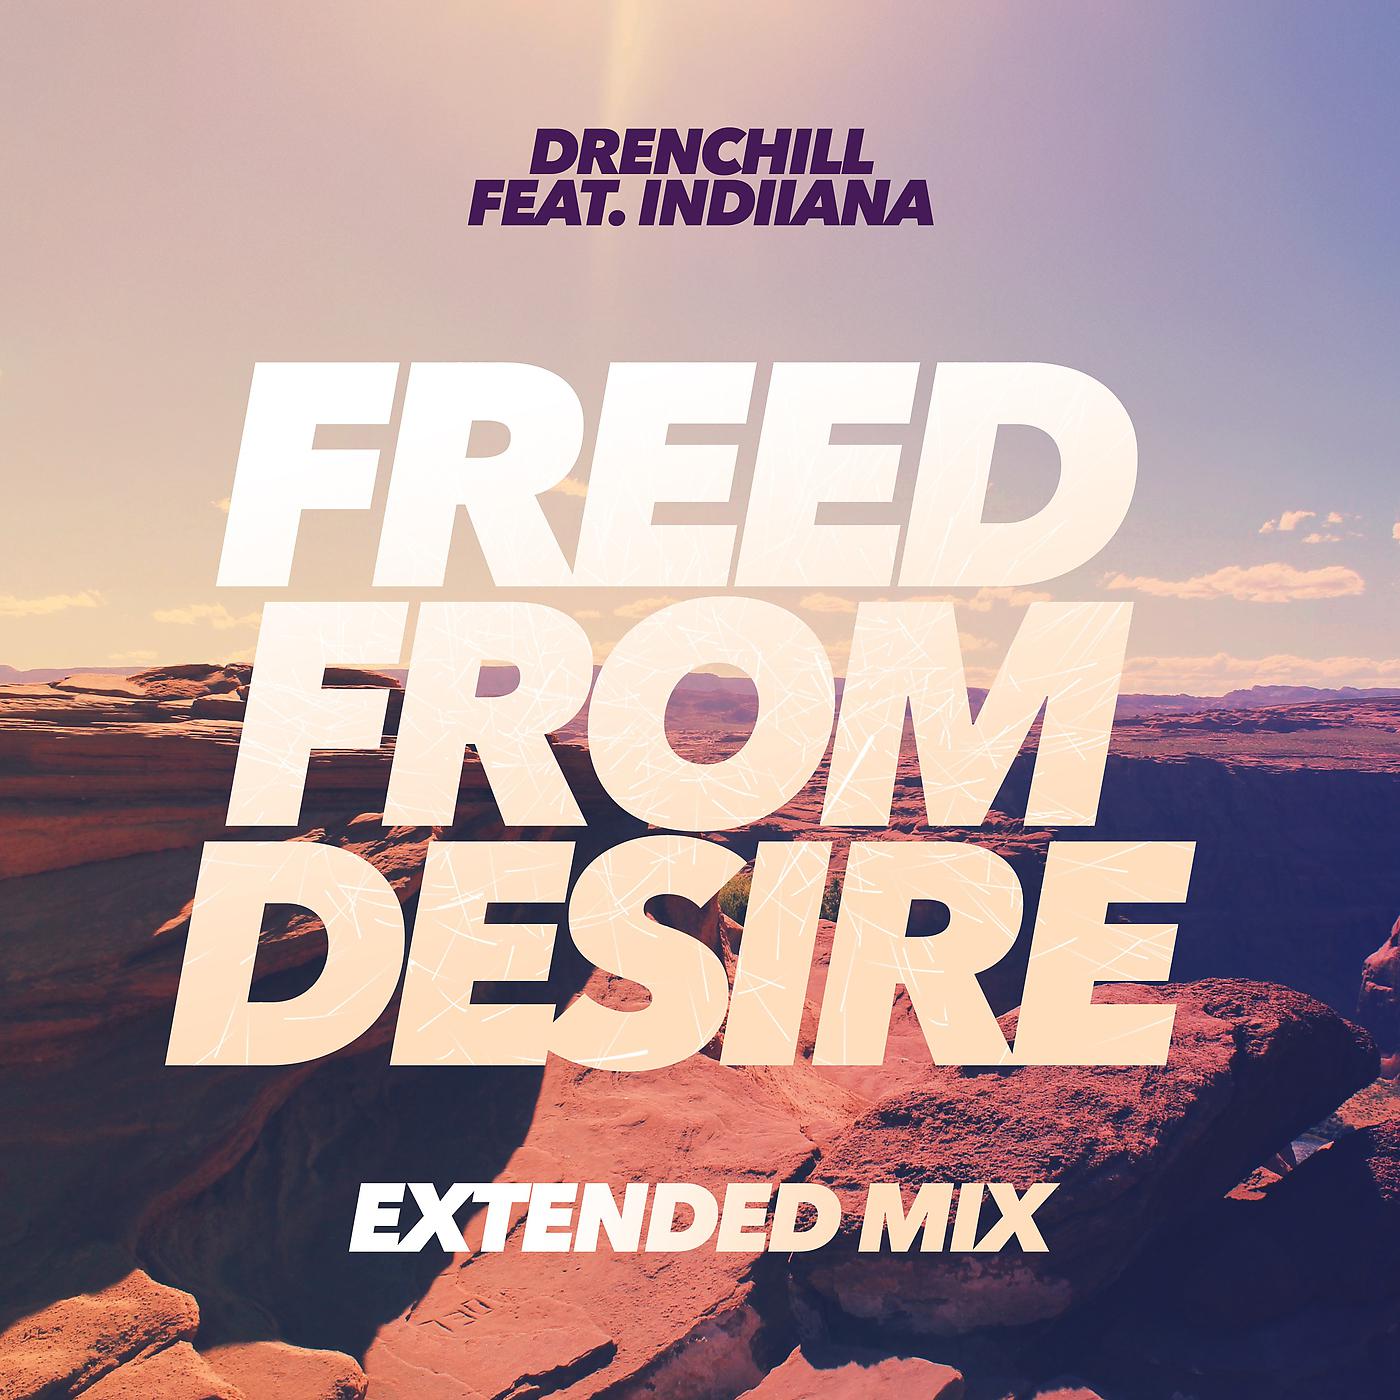 Включи freed from desire. Drenchill Indiiana. Freed from Desire. Drenchill feat. Indiiana - freed from Desire. Freed from Desire обложка.